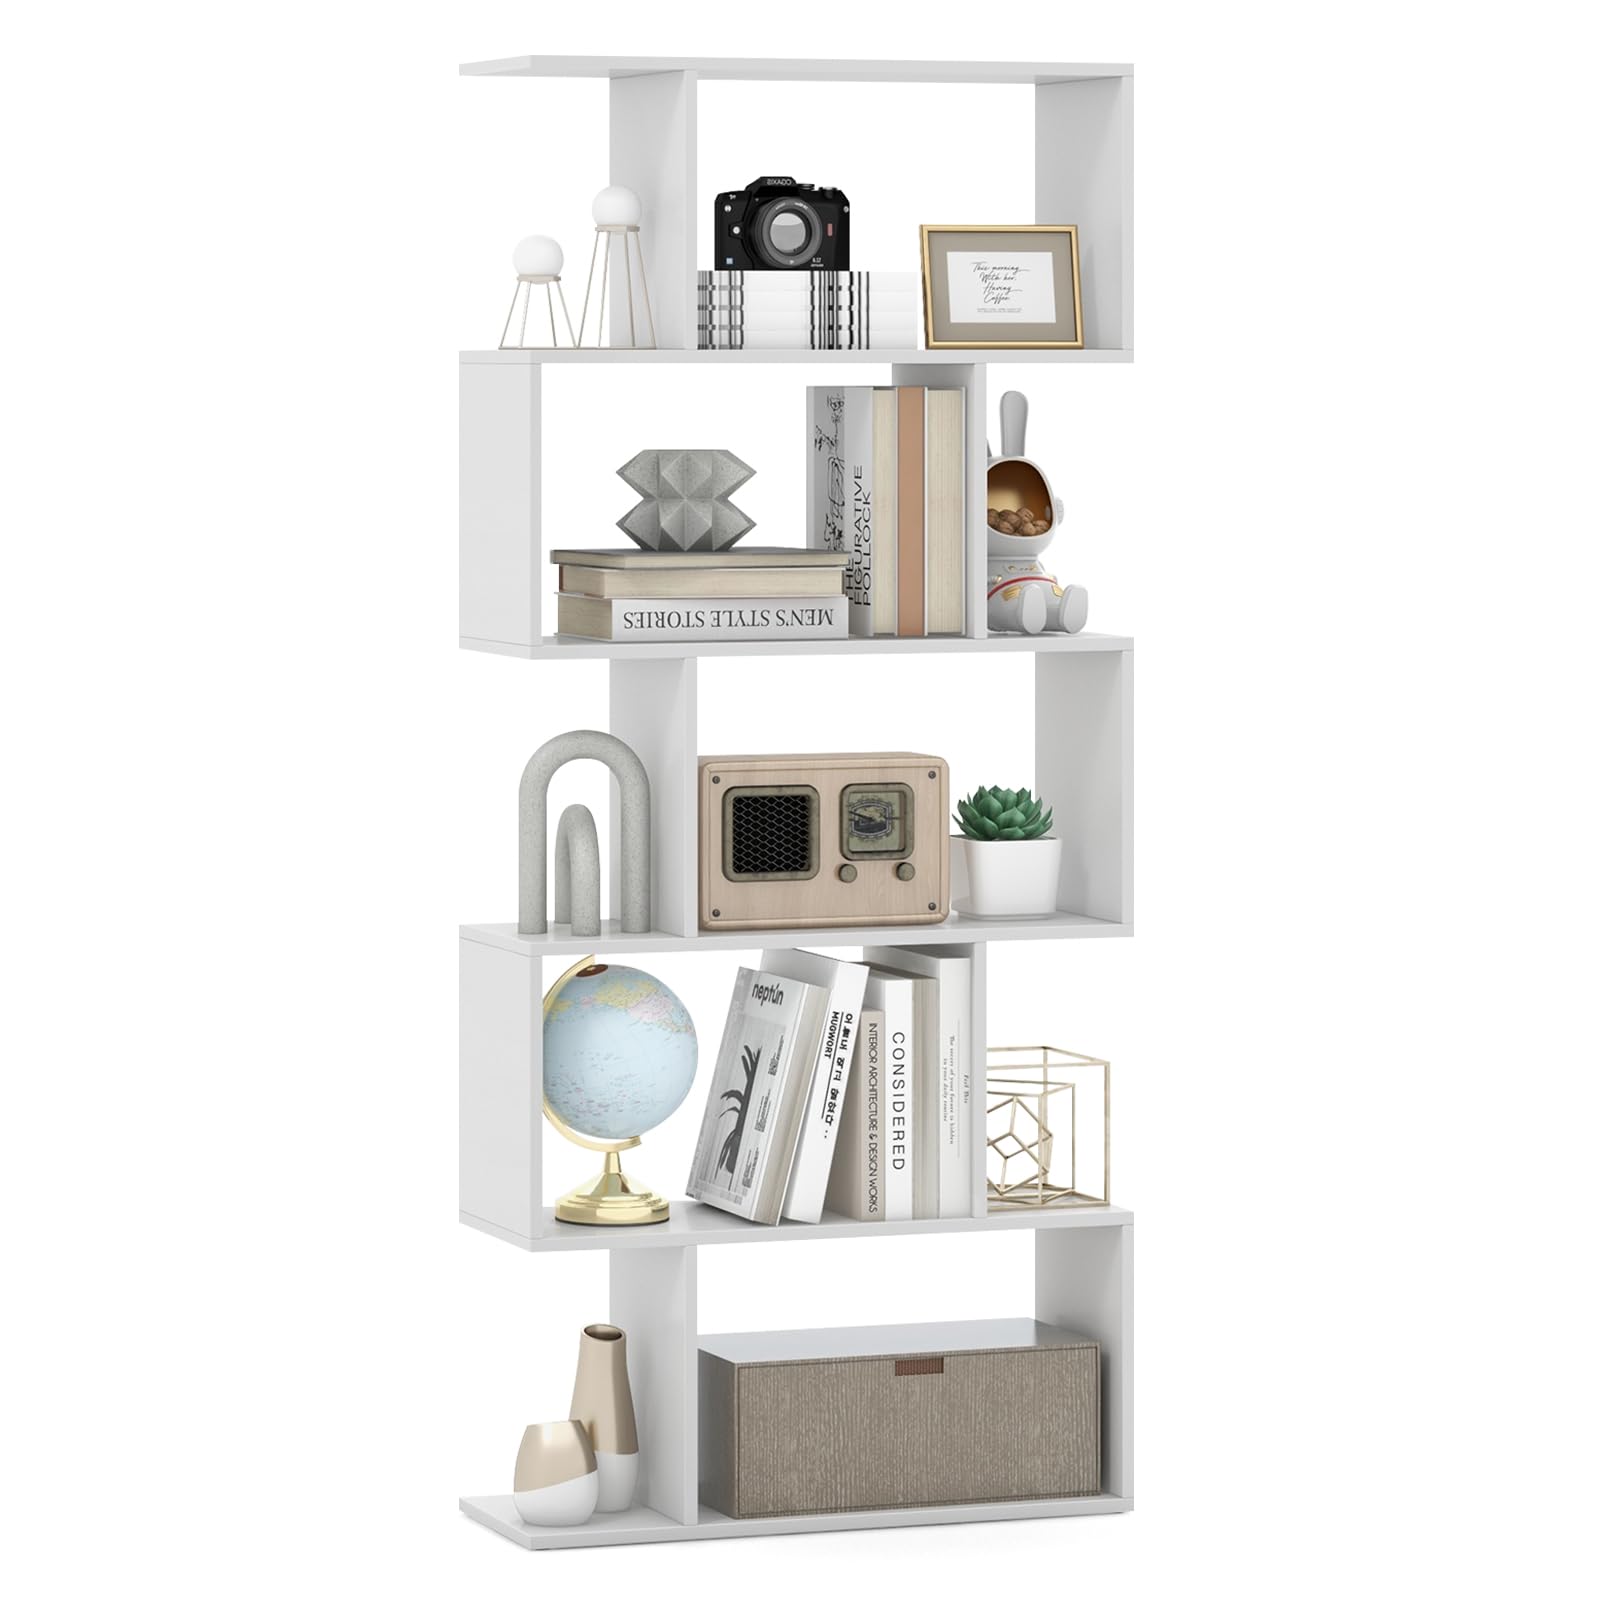 Giantex 5-Tier Geometric Bookshelf, 62.5" Tall Wood S-Shaped Bookcase with Anti-Tipping Device